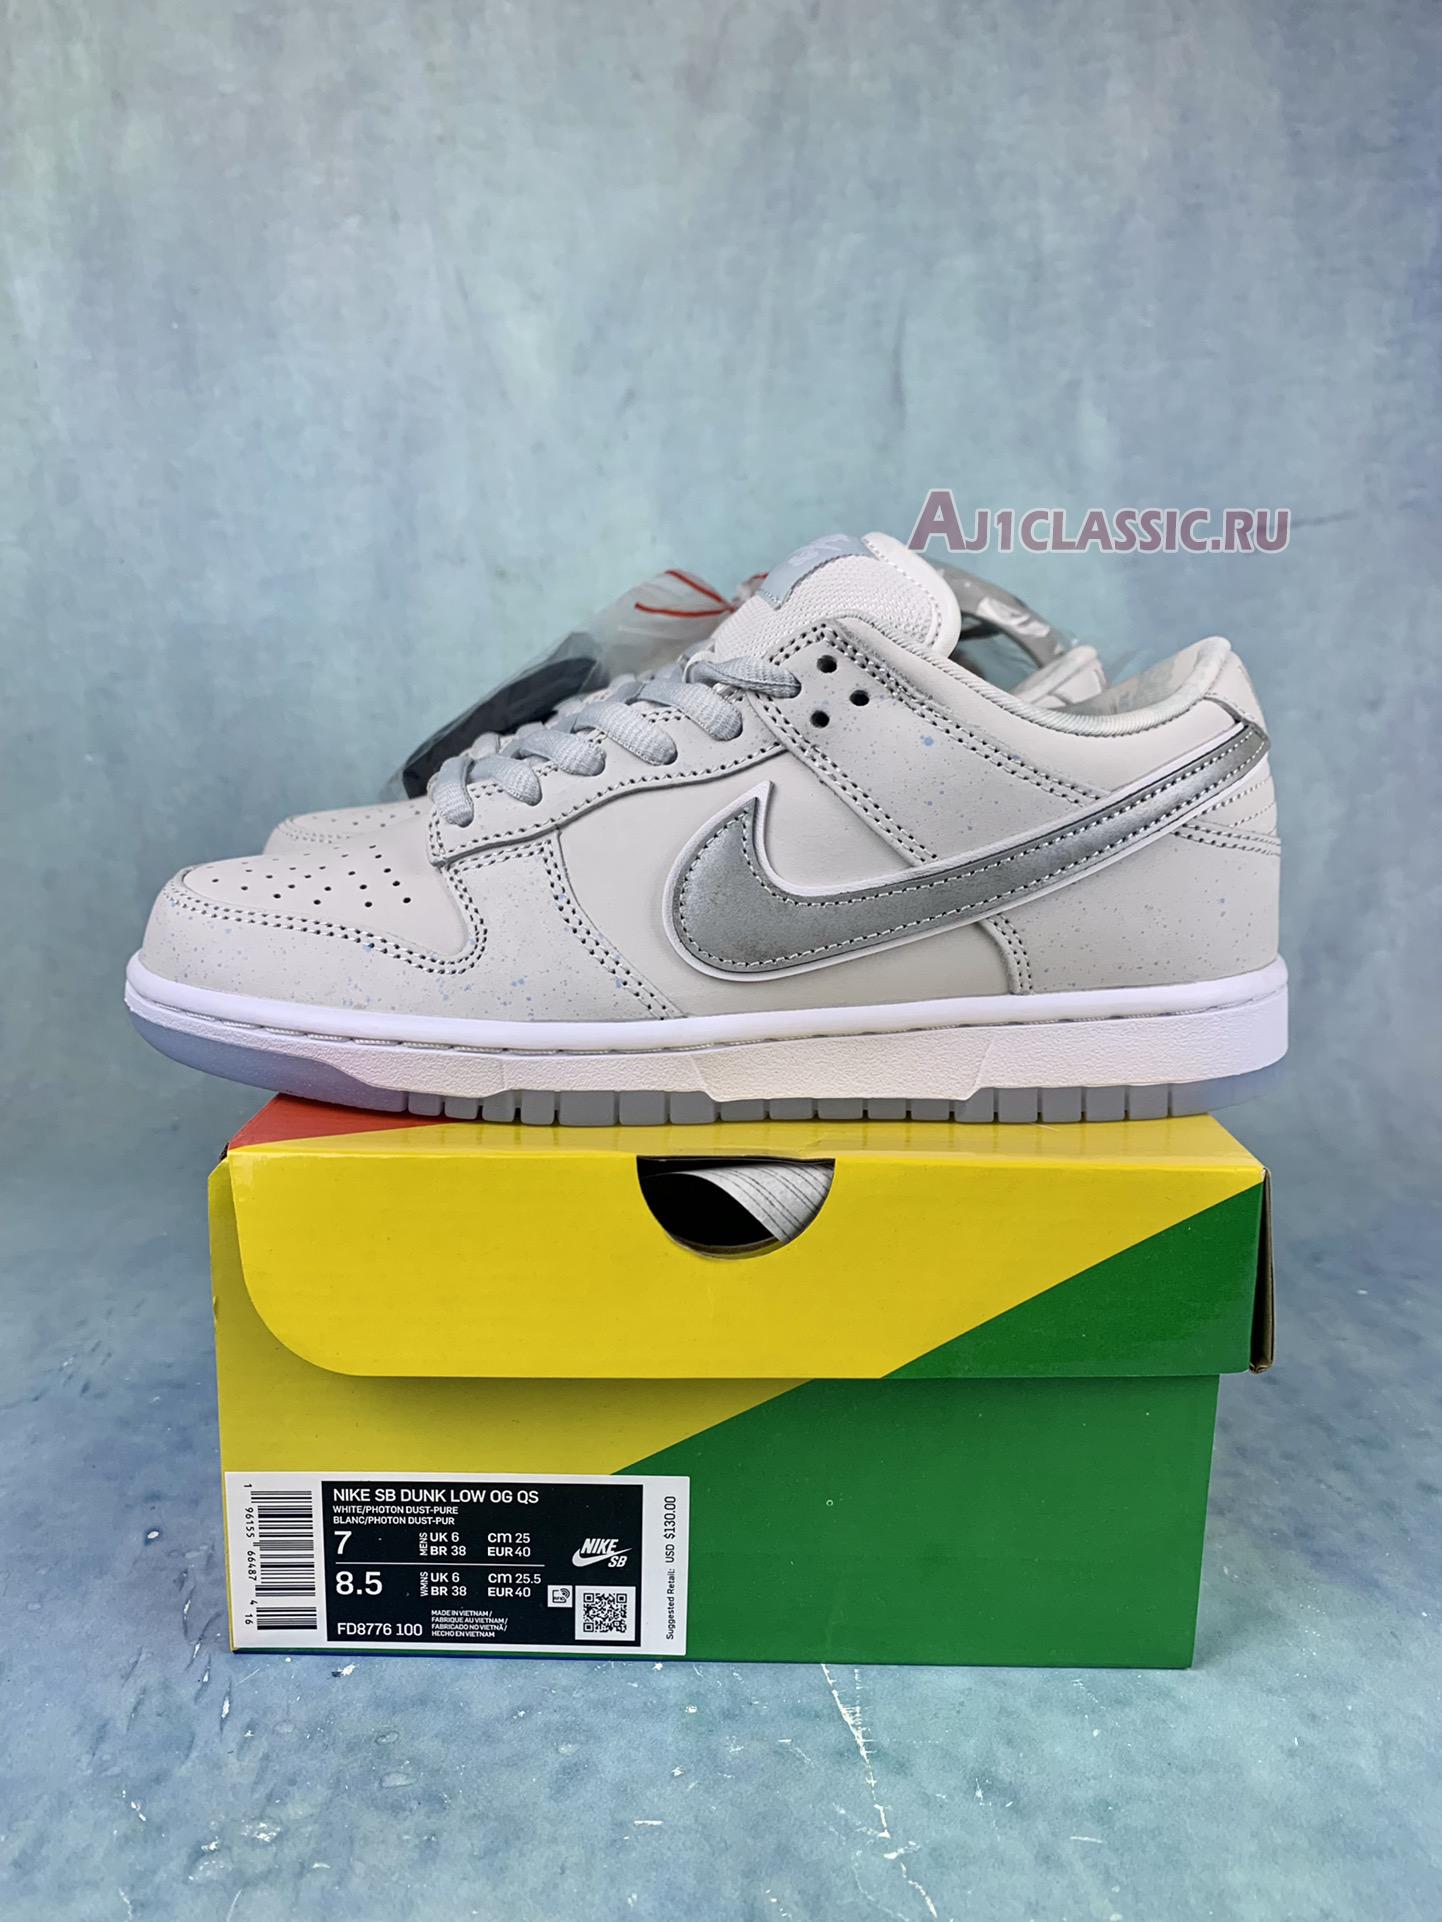 Concepts x Nike Dunk Low OG SB QS "White Lobster" Friends & Family FD8776-100